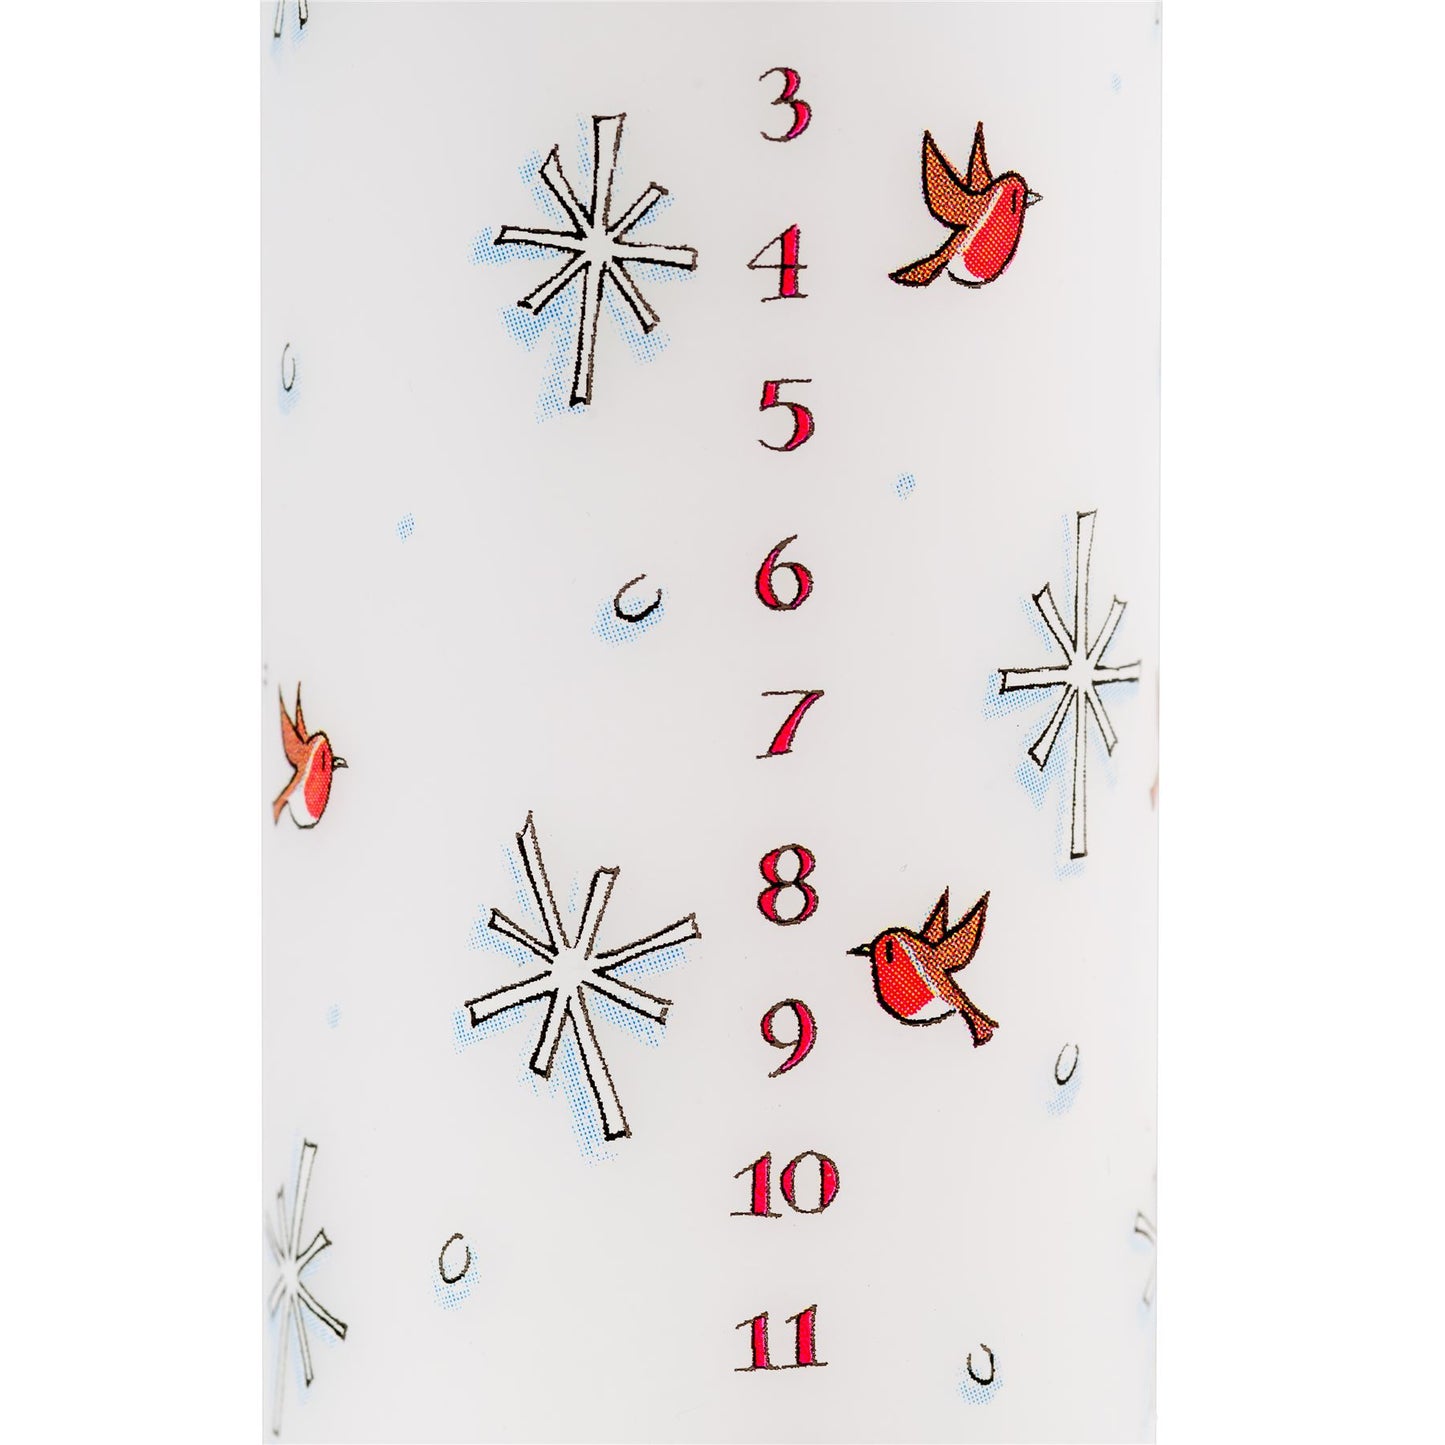 Traditional Countdown To Christmas Advent Dinner Pillar Candle - Snowman And Snowflake Design (Large Size)